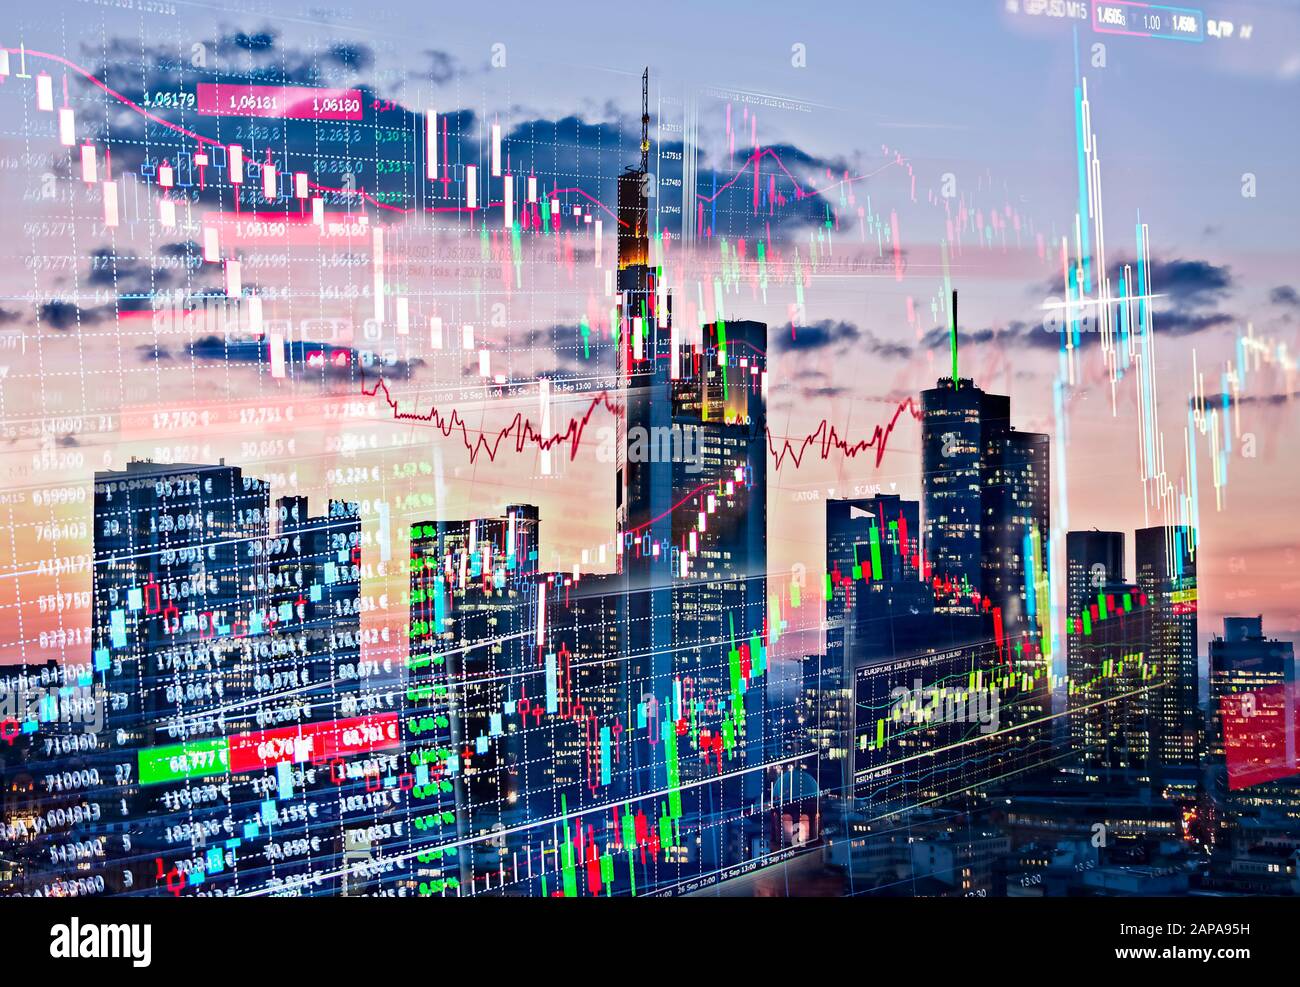 Skyline of Frankfurt am Main with symbols of the financial sector Stock Photo